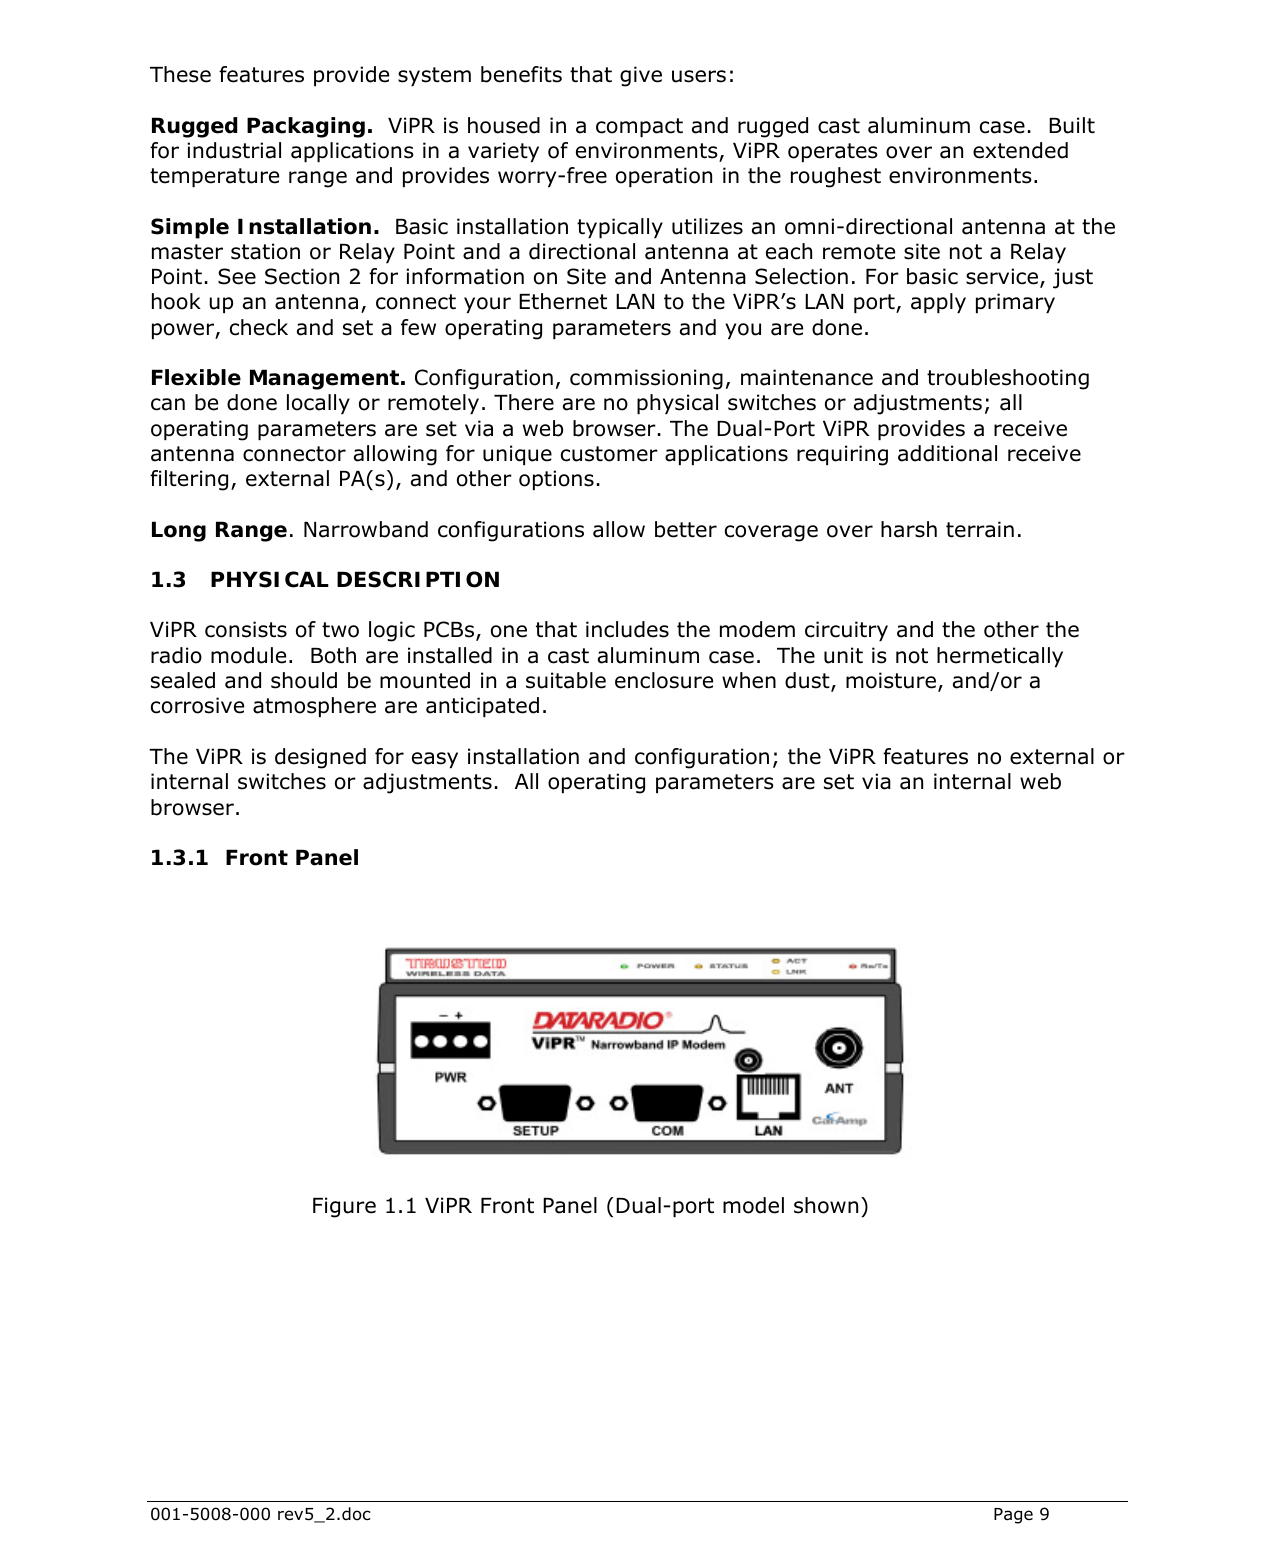  001-5008-000 rev5_2.doc    Page 9 These features provide system benefits that give users:  Rugged Packaging.  ViPR is housed in a compact and rugged cast aluminum case.  Built for industrial applications in a variety of environments, ViPR operates over an extended temperature range and provides worry-free operation in the roughest environments. Simple Installation.  Basic installation typically utilizes an omni-directional antenna at the master station or Relay Point and a directional antenna at each remote site not a Relay Point. See Section 2 for information on Site and Antenna Selection. For basic service, just hook up an antenna, connect your Ethernet LAN to the ViPR’s LAN port, apply primary power, check and set a few operating parameters and you are done.   Flexible Management. Configuration, commissioning, maintenance and troubleshooting can be done locally or remotely. There are no physical switches or adjustments; all operating parameters are set via a web browser. The Dual-Port ViPR provides a receive antenna connector allowing for unique customer applications requiring additional receive filtering, external PA(s), and other options. Long Range. Narrowband configurations allow better coverage over harsh terrain.  1.3 PHYSICAL DESCRIPTION ViPR consists of two logic PCBs, one that includes the modem circuitry and the other the radio module.  Both are installed in a cast aluminum case.  The unit is not hermetically sealed and should be mounted in a suitable enclosure when dust, moisture, and/or a corrosive atmosphere are anticipated.   The ViPR is designed for easy installation and configuration; the ViPR features no external or internal switches or adjustments.  All operating parameters are set via an internal web browser.  1.3.1 Front Panel                          Figure 1.1 ViPR Front Panel (Dual-port model shown) 